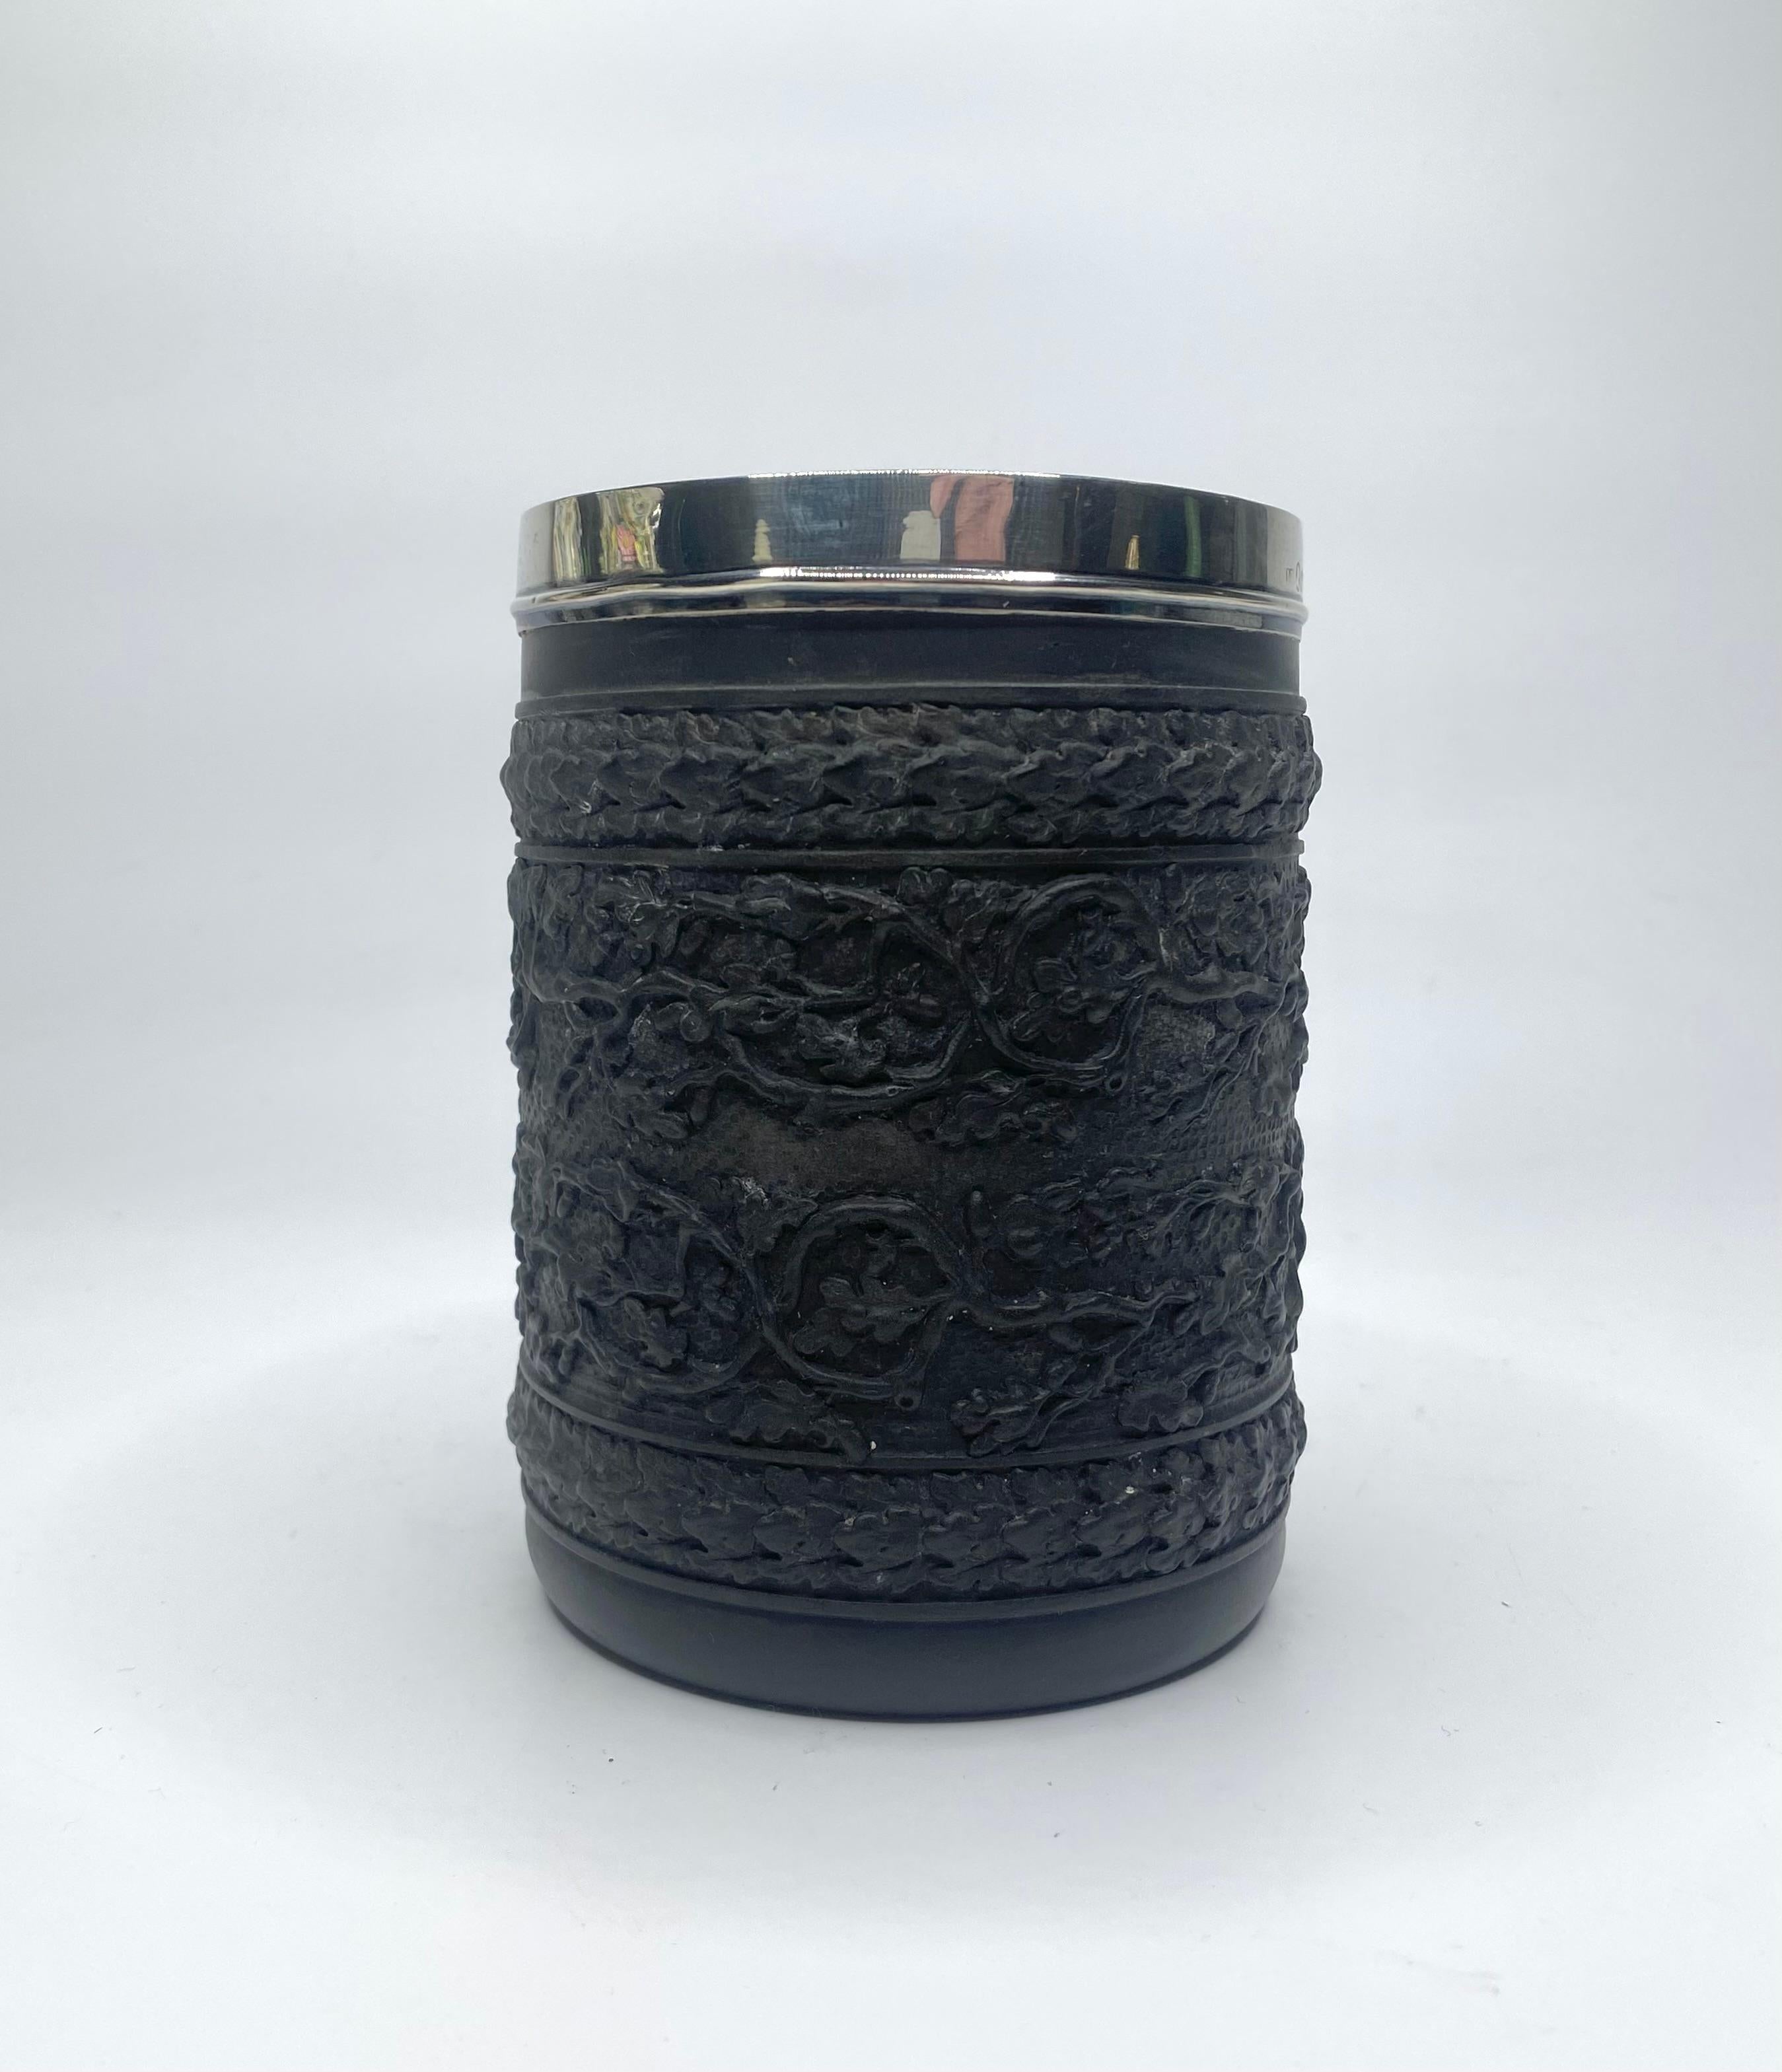 Wedgwood black basalt mug, with silver mount, dated 1808. The mug heavily moulded with a continuous band of entwined branches of oak leaves and acorns, between bands of overlapping leaves. The loop handle moulded with overlapping leaves.
Silver